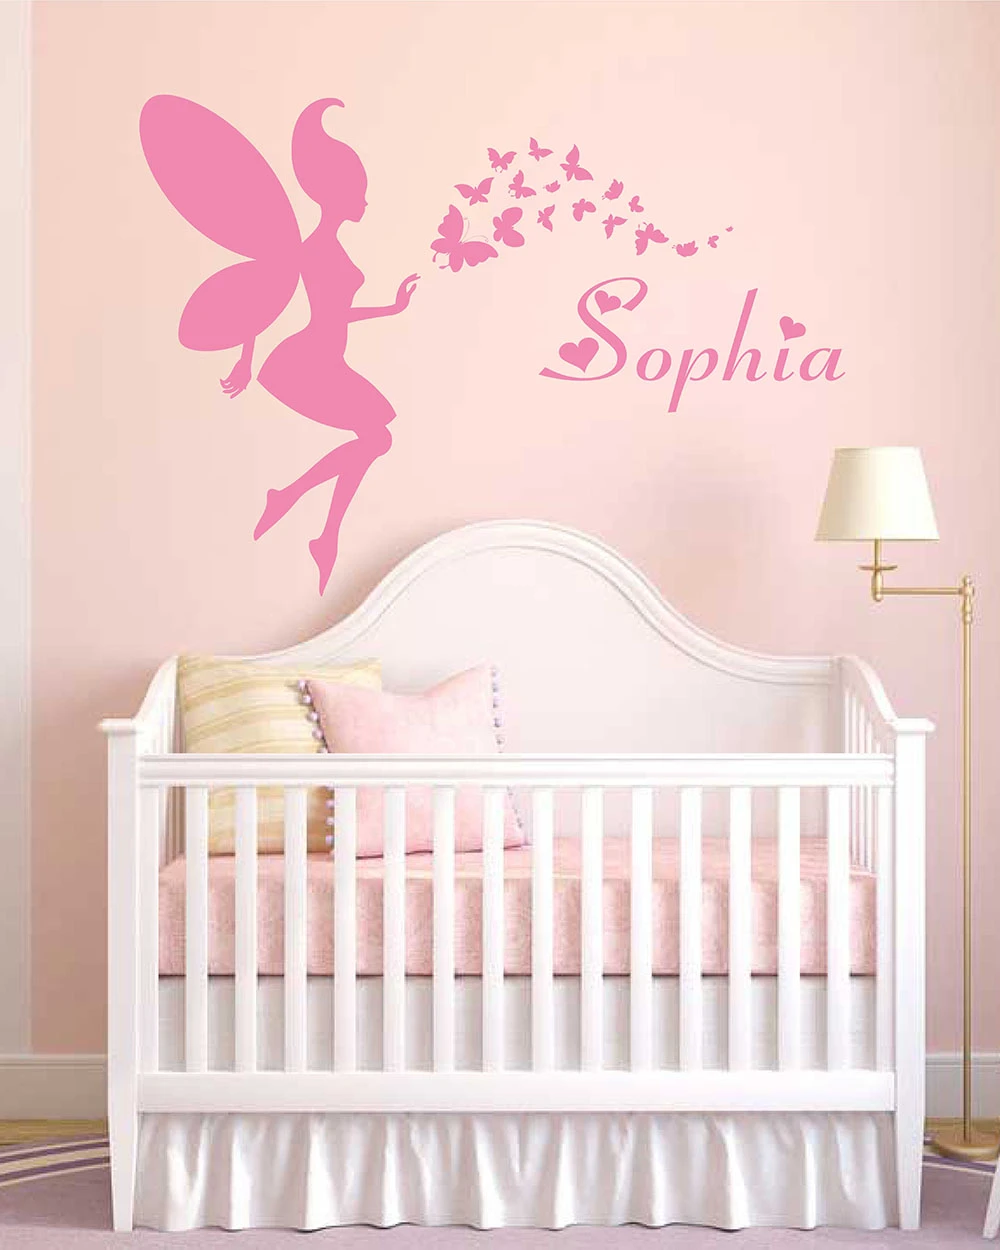 Fairy Wall Decal,Personalized Name Decal,Girl Kids Wall Decal,Girls Wall Art,Monogram Vinyl Wall Decal,Baby Nursery Wall Decal  PZ0291